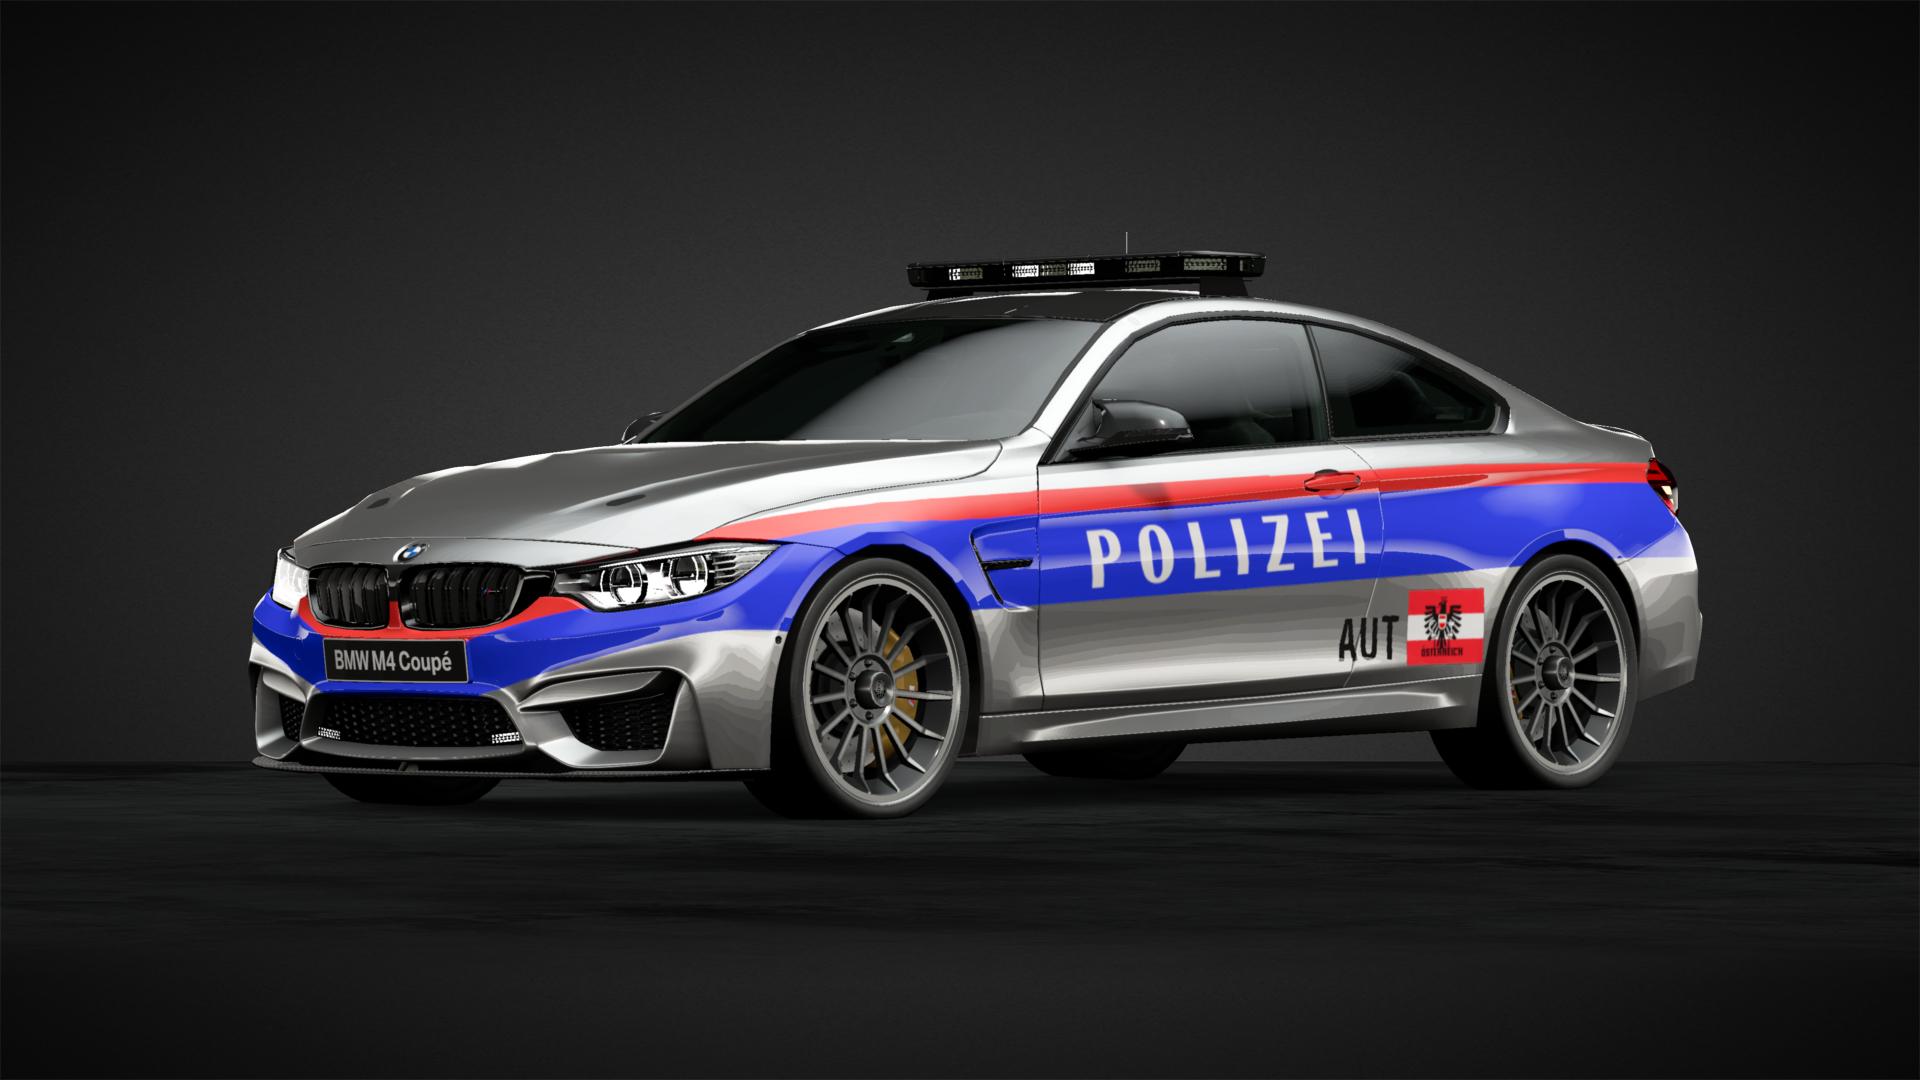 Polizei - Austria - Österreich - Car Livery By Ronald - Police Car , HD Wallpaper & Backgrounds